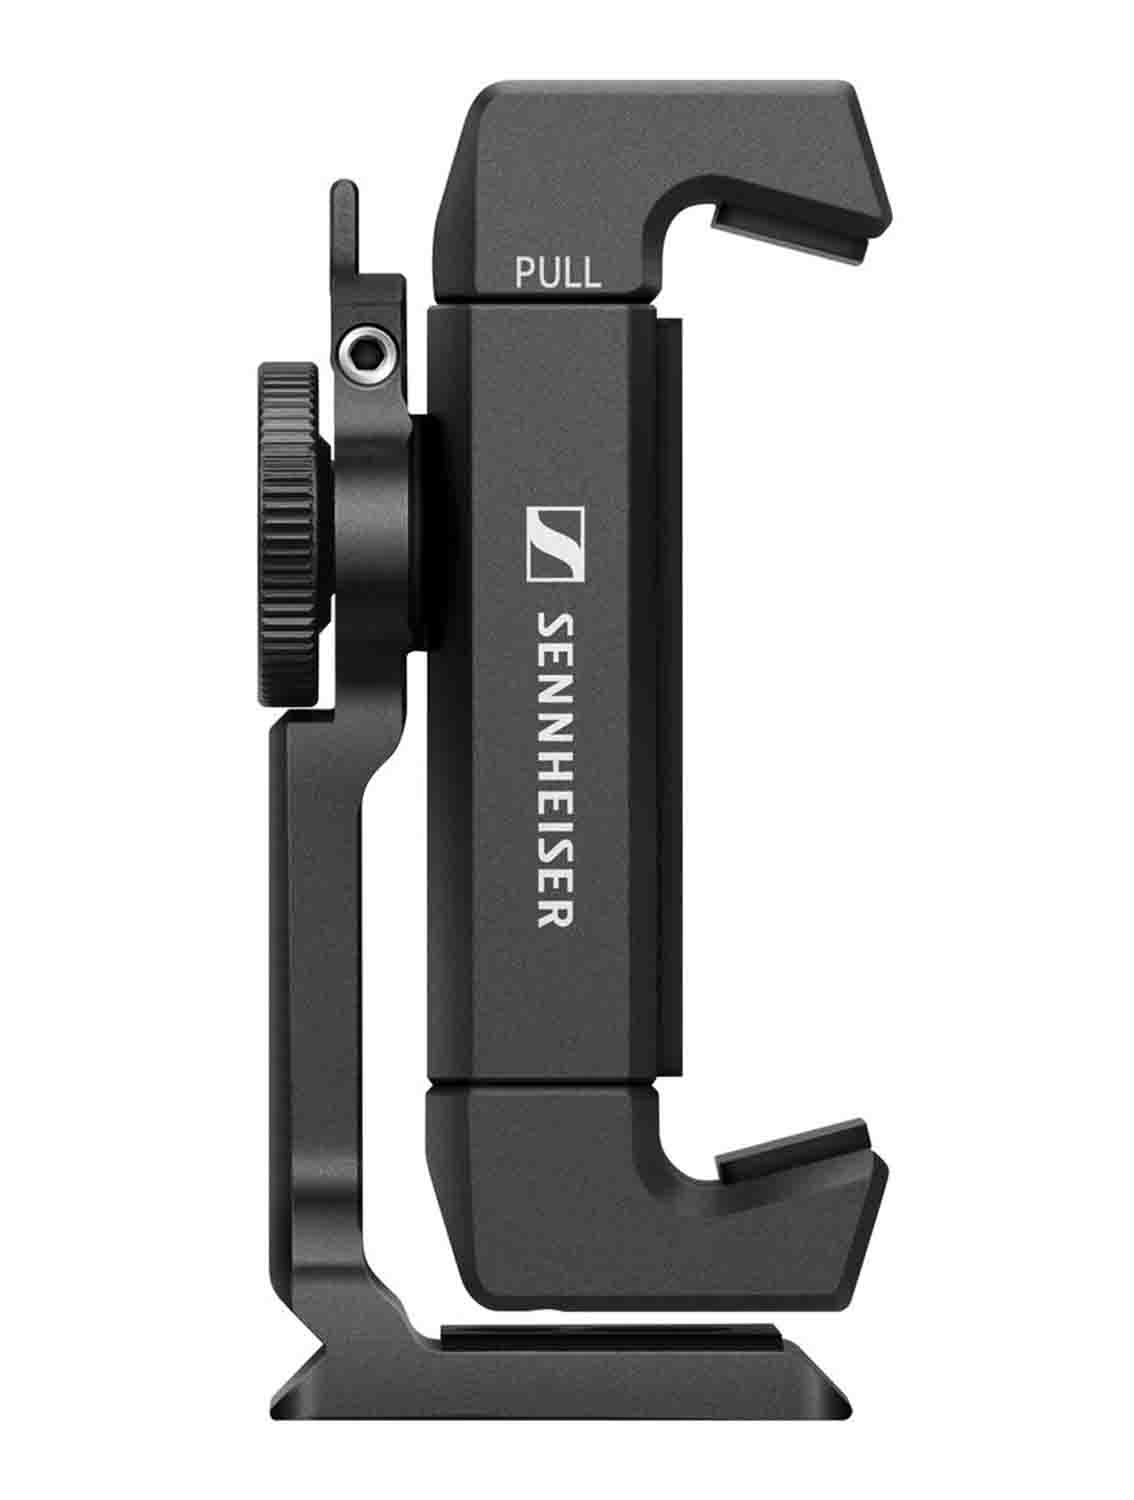 Sennheiser MKE 200 MOBILE KIT Directional Camera Microphone with Smartphone Clamp and Tripod Stand - Hollywood DJ